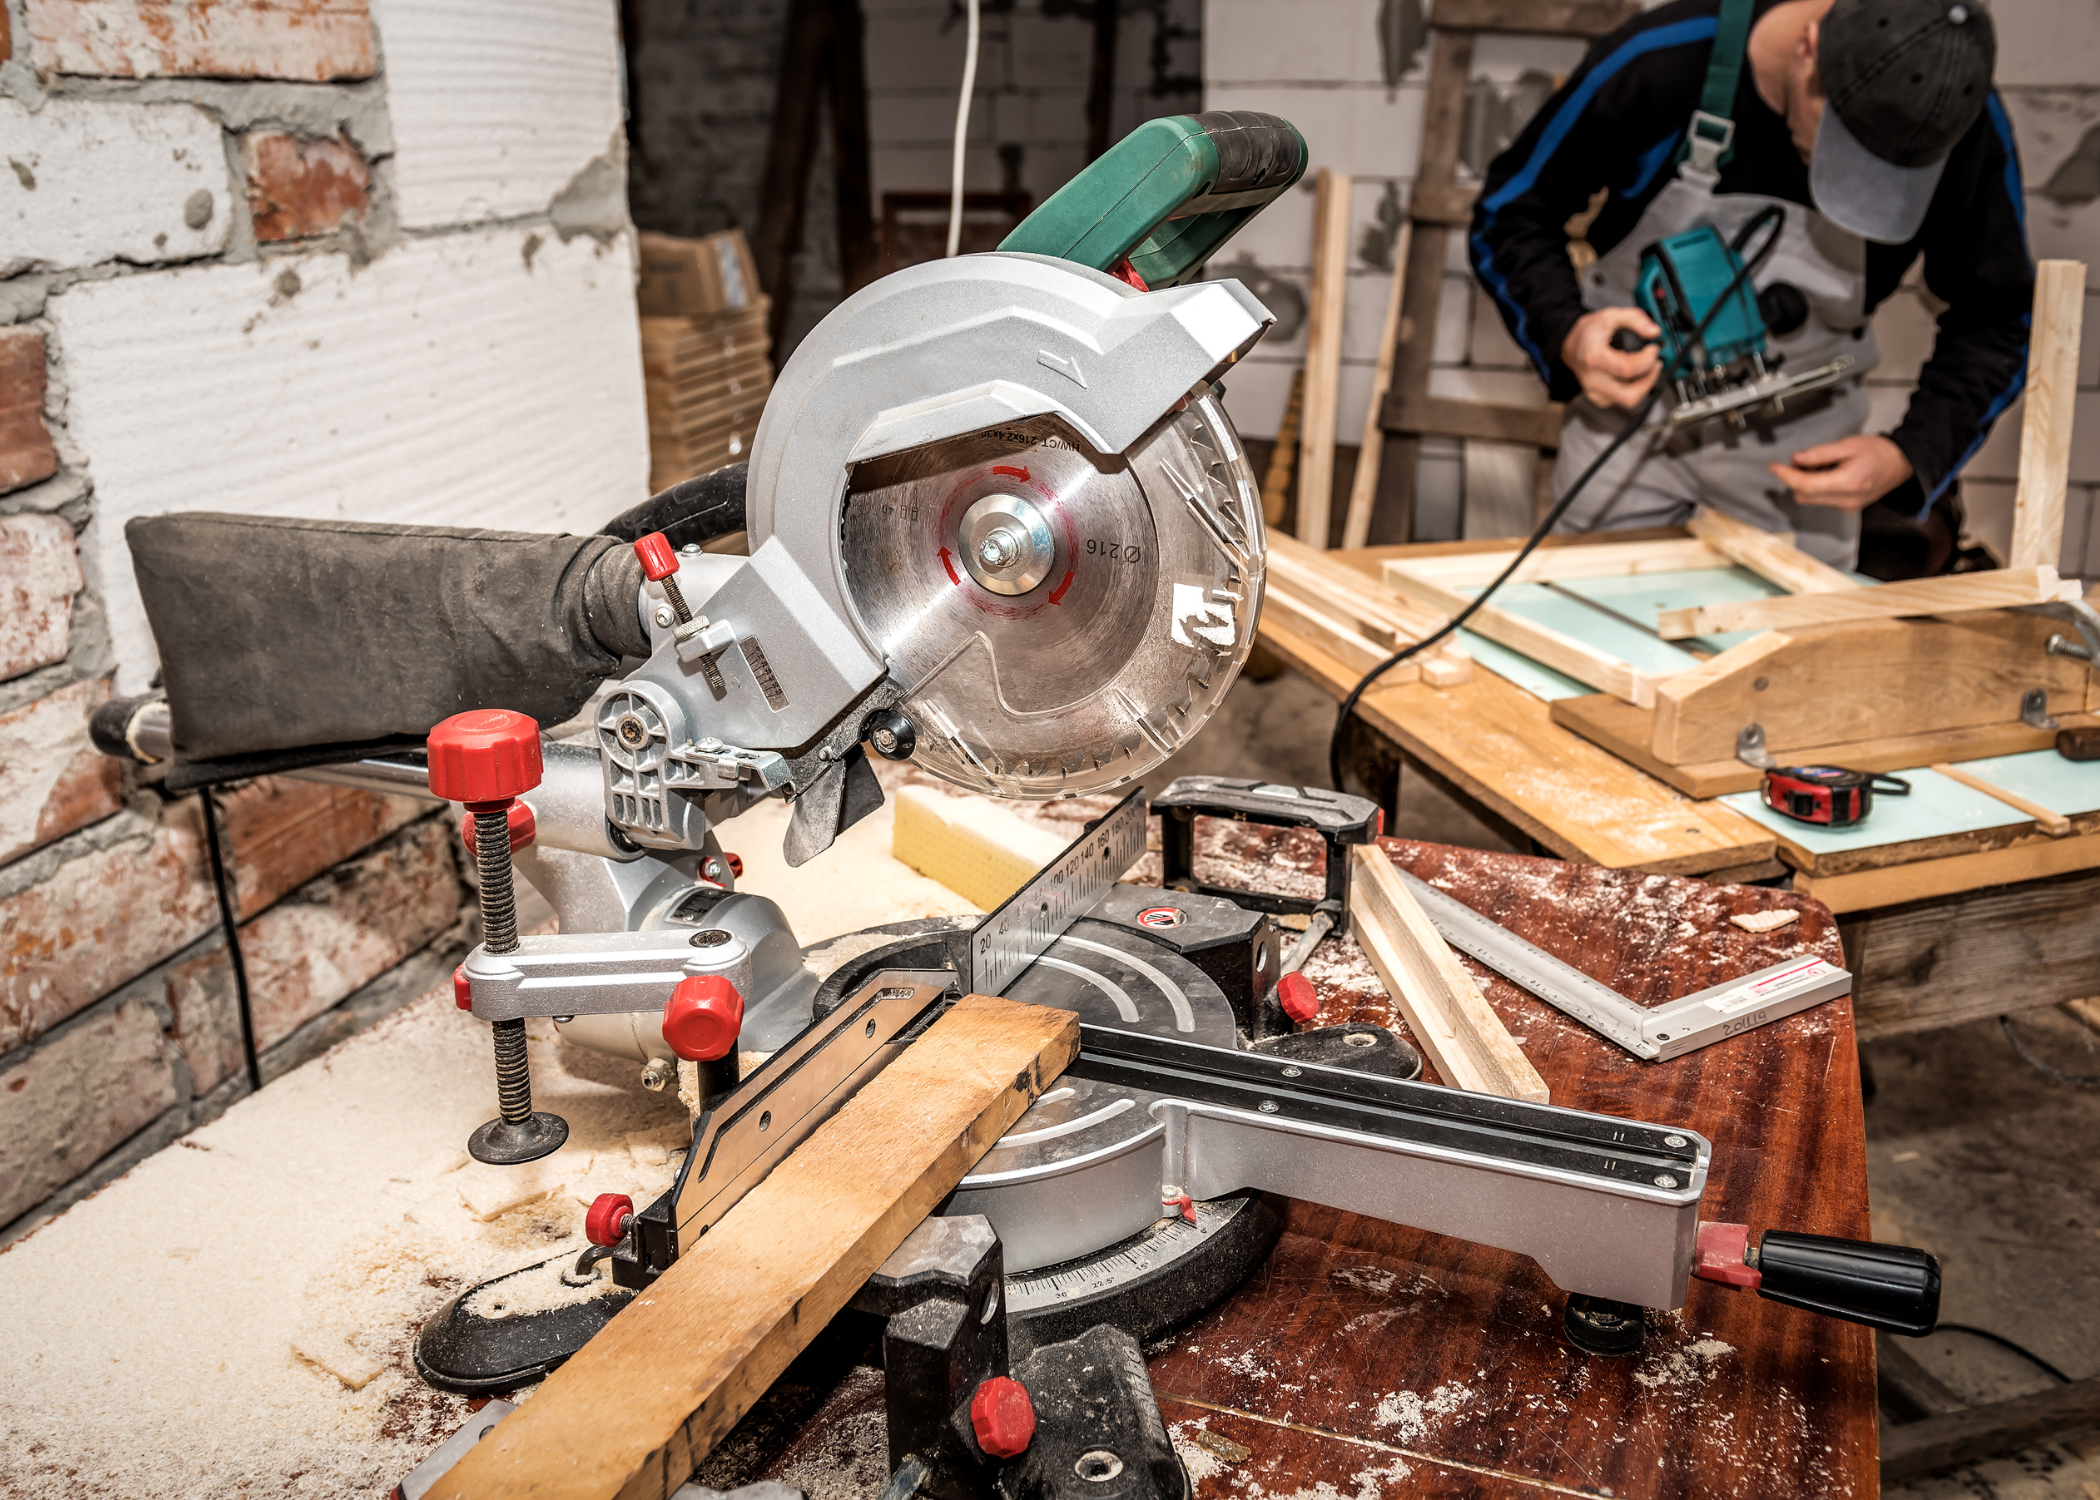 miter saw on workbench with man working in the background